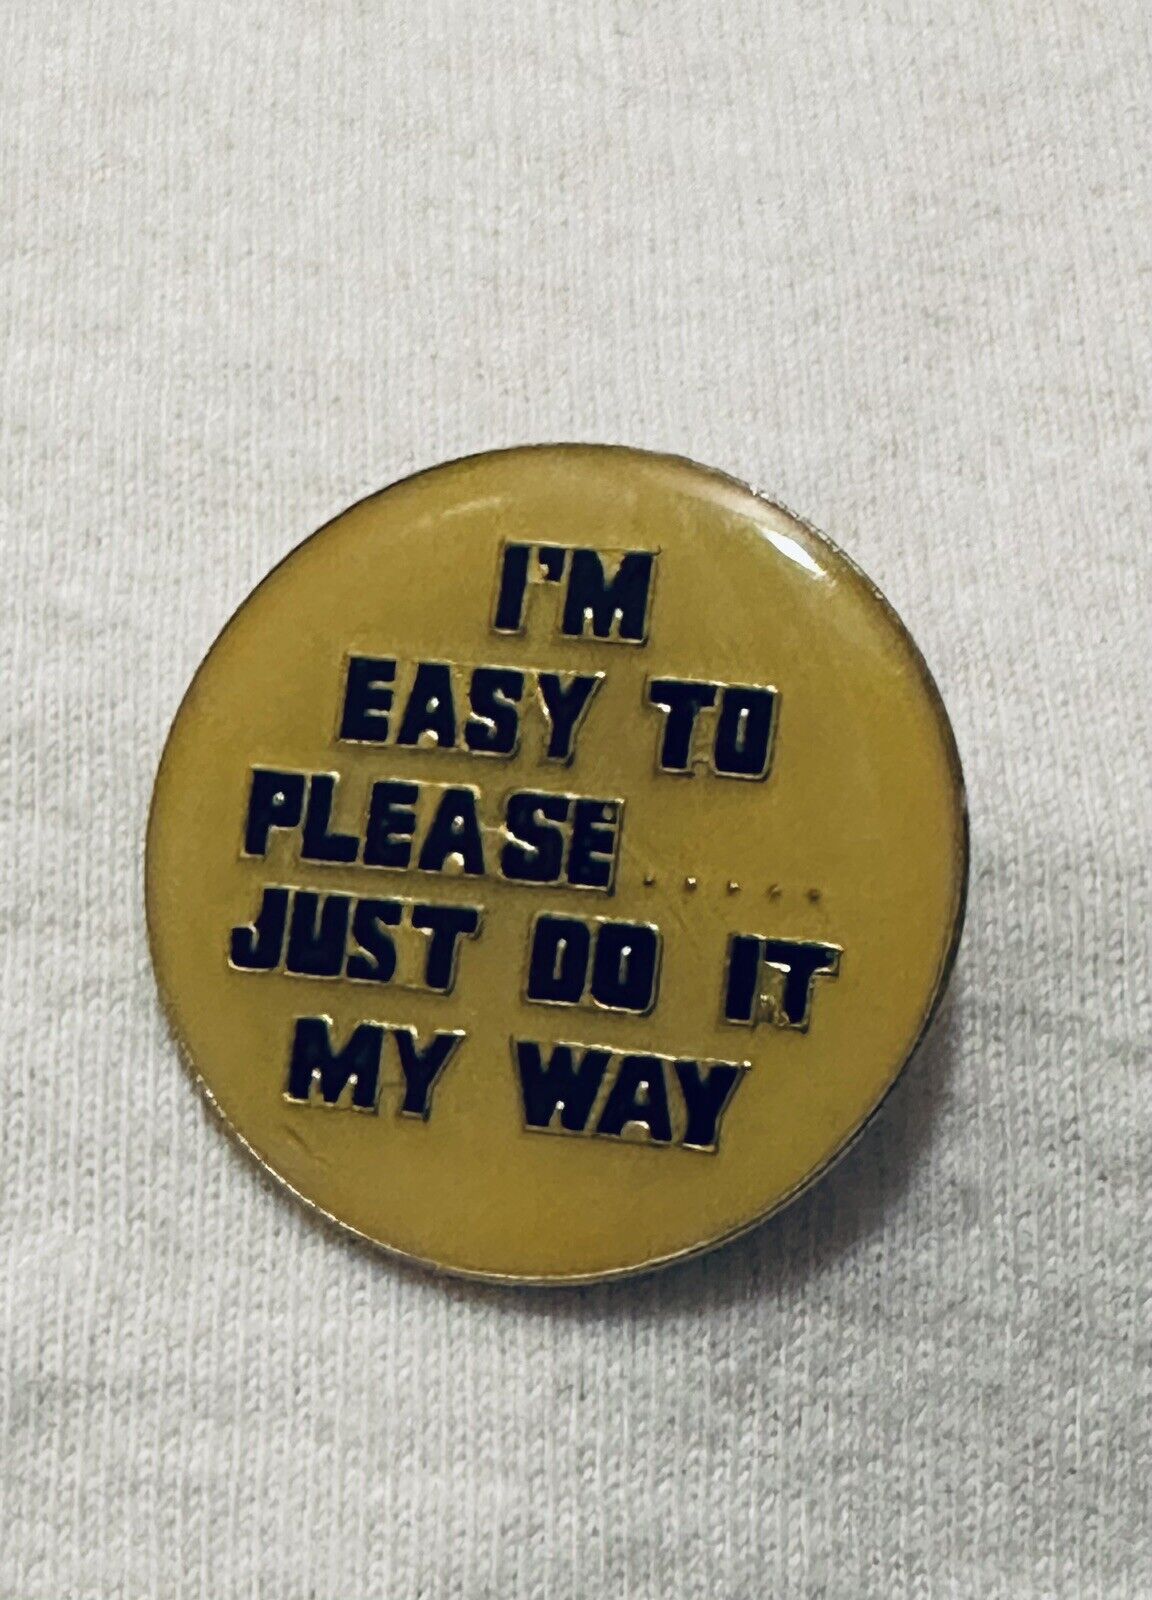 Vintage 1980s Enamel Risqué Novelty Pin “I’m Easy to Please…..Just Do It My Way”